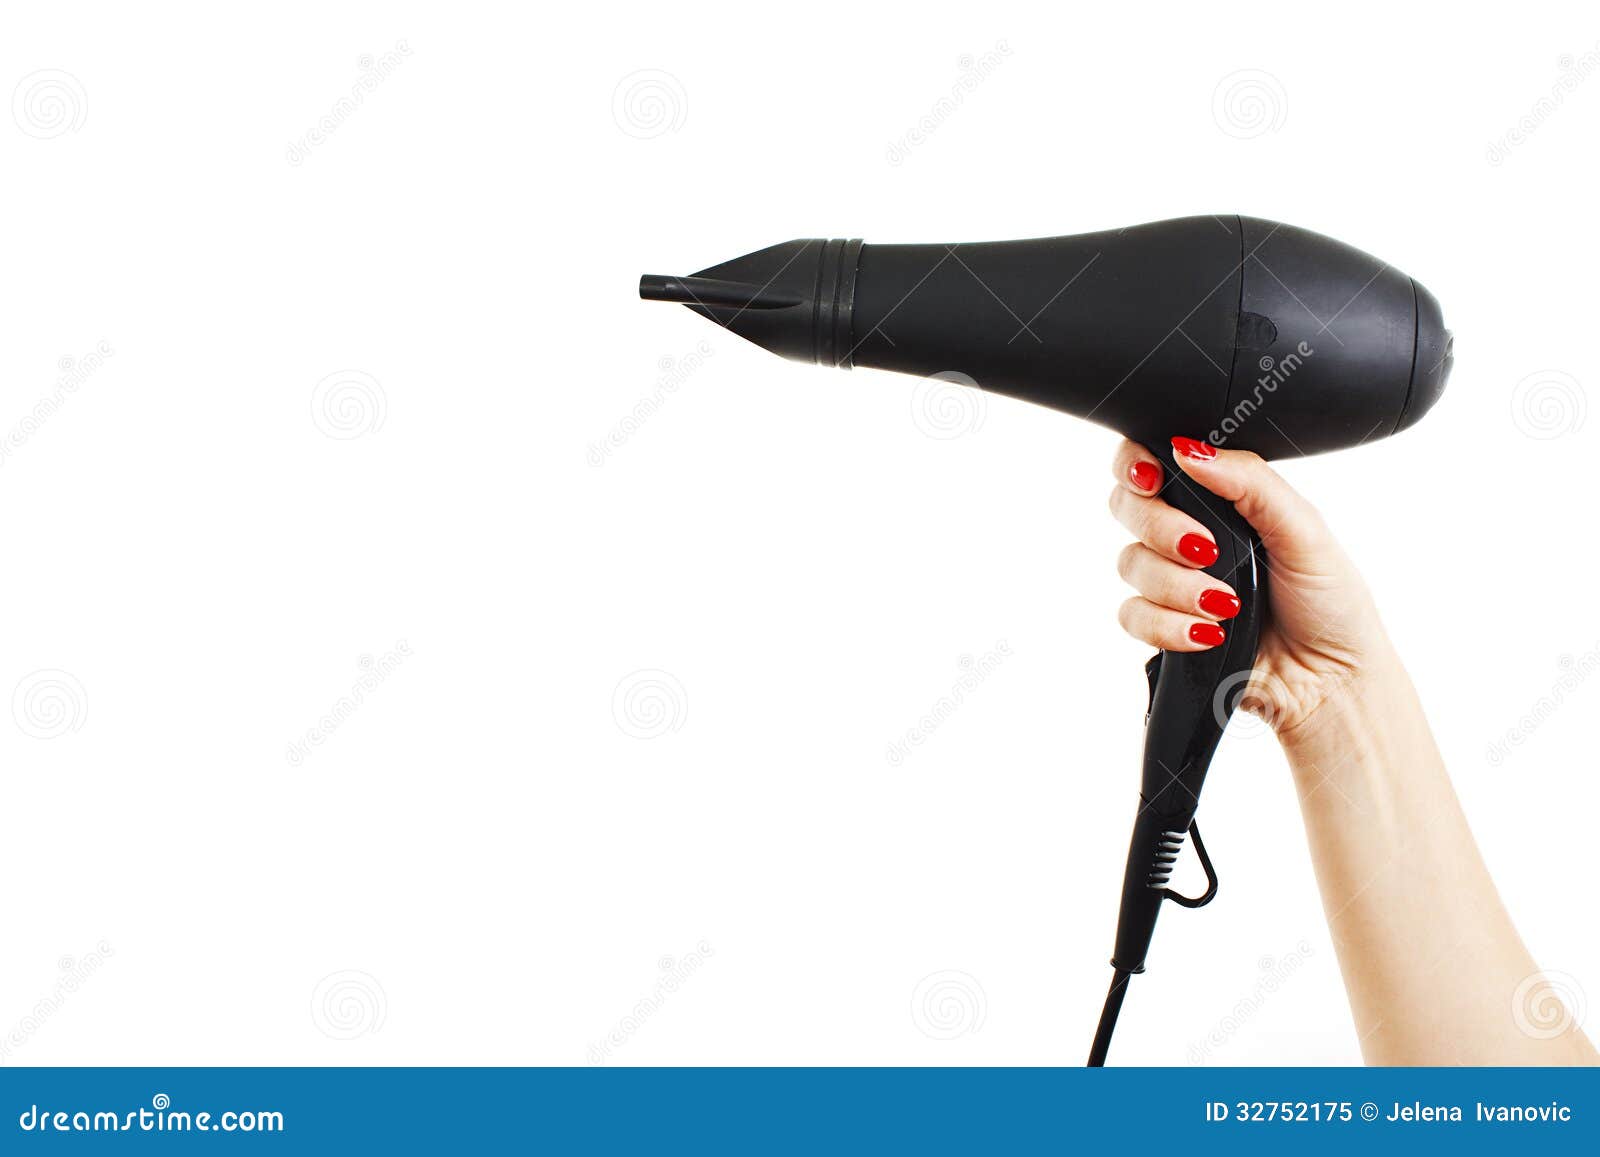 Hairdryer In Hand Royalty Free Stock Photo - Image: 32752175